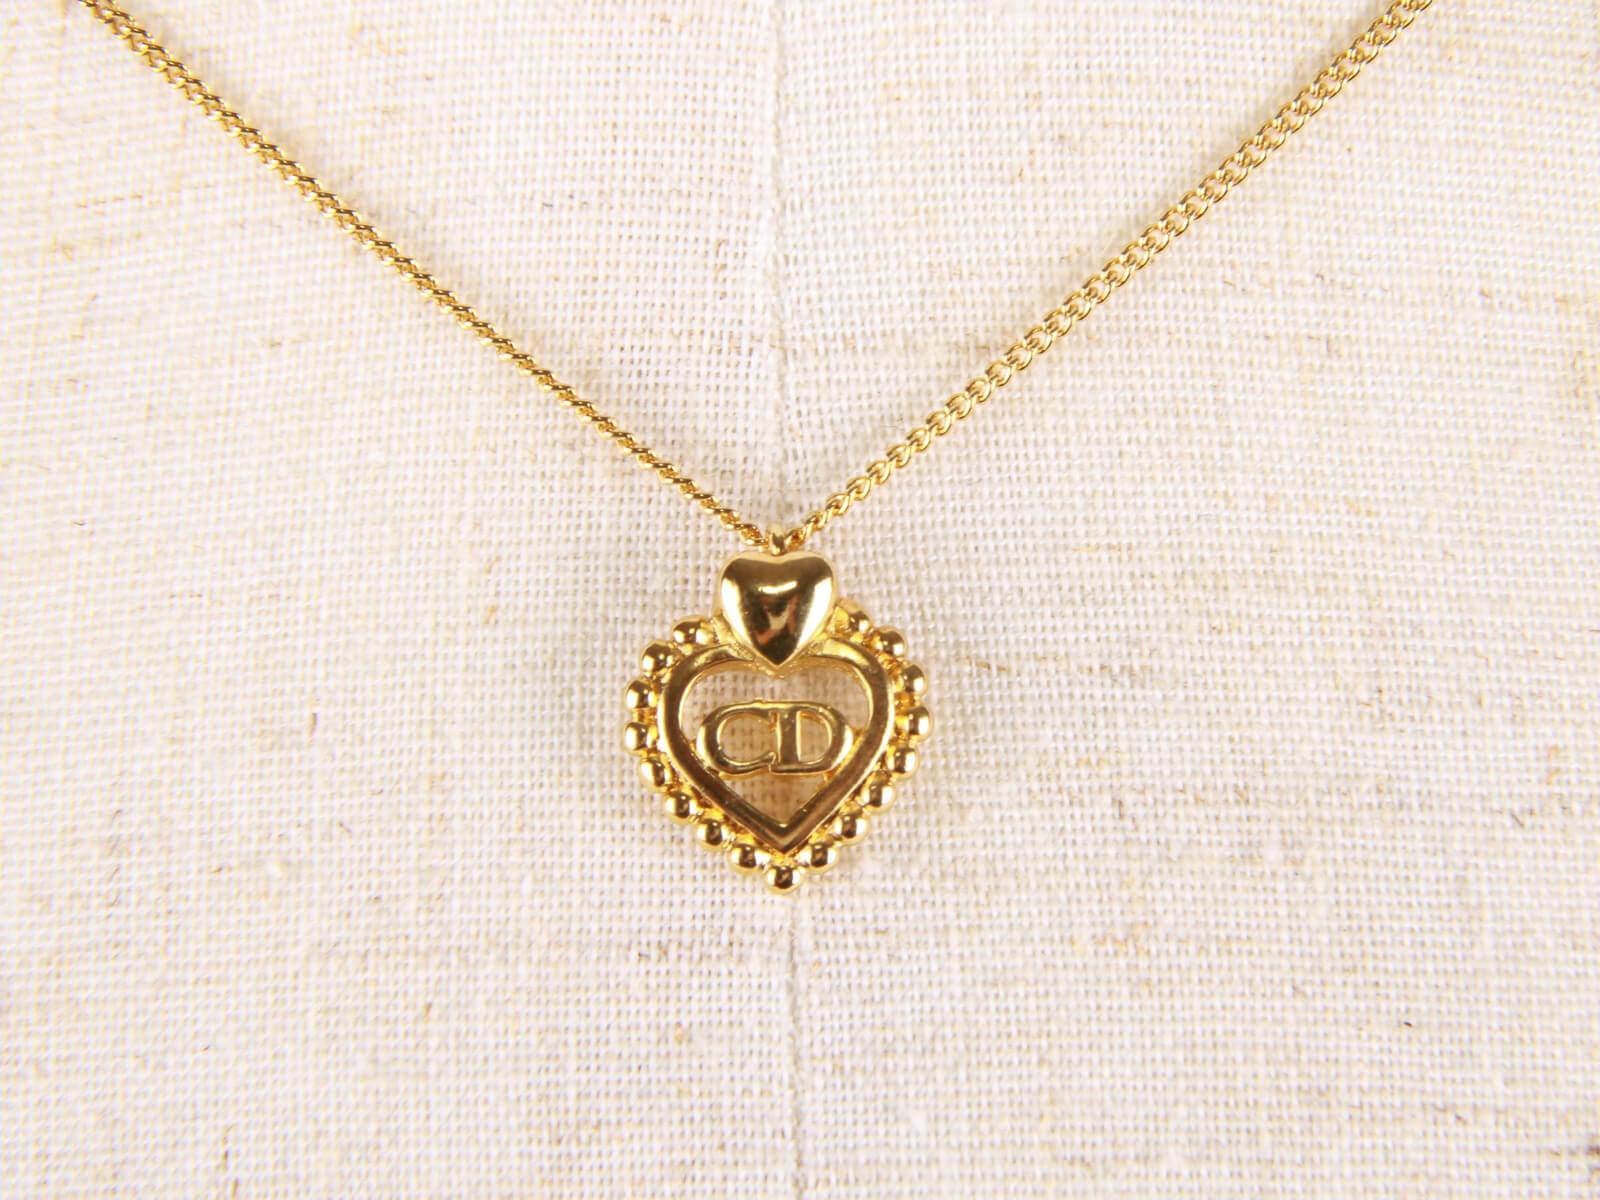 Dior  Jewelry  Christian Dior Logo D Crystal Heart Gold Necklace   Poshmark